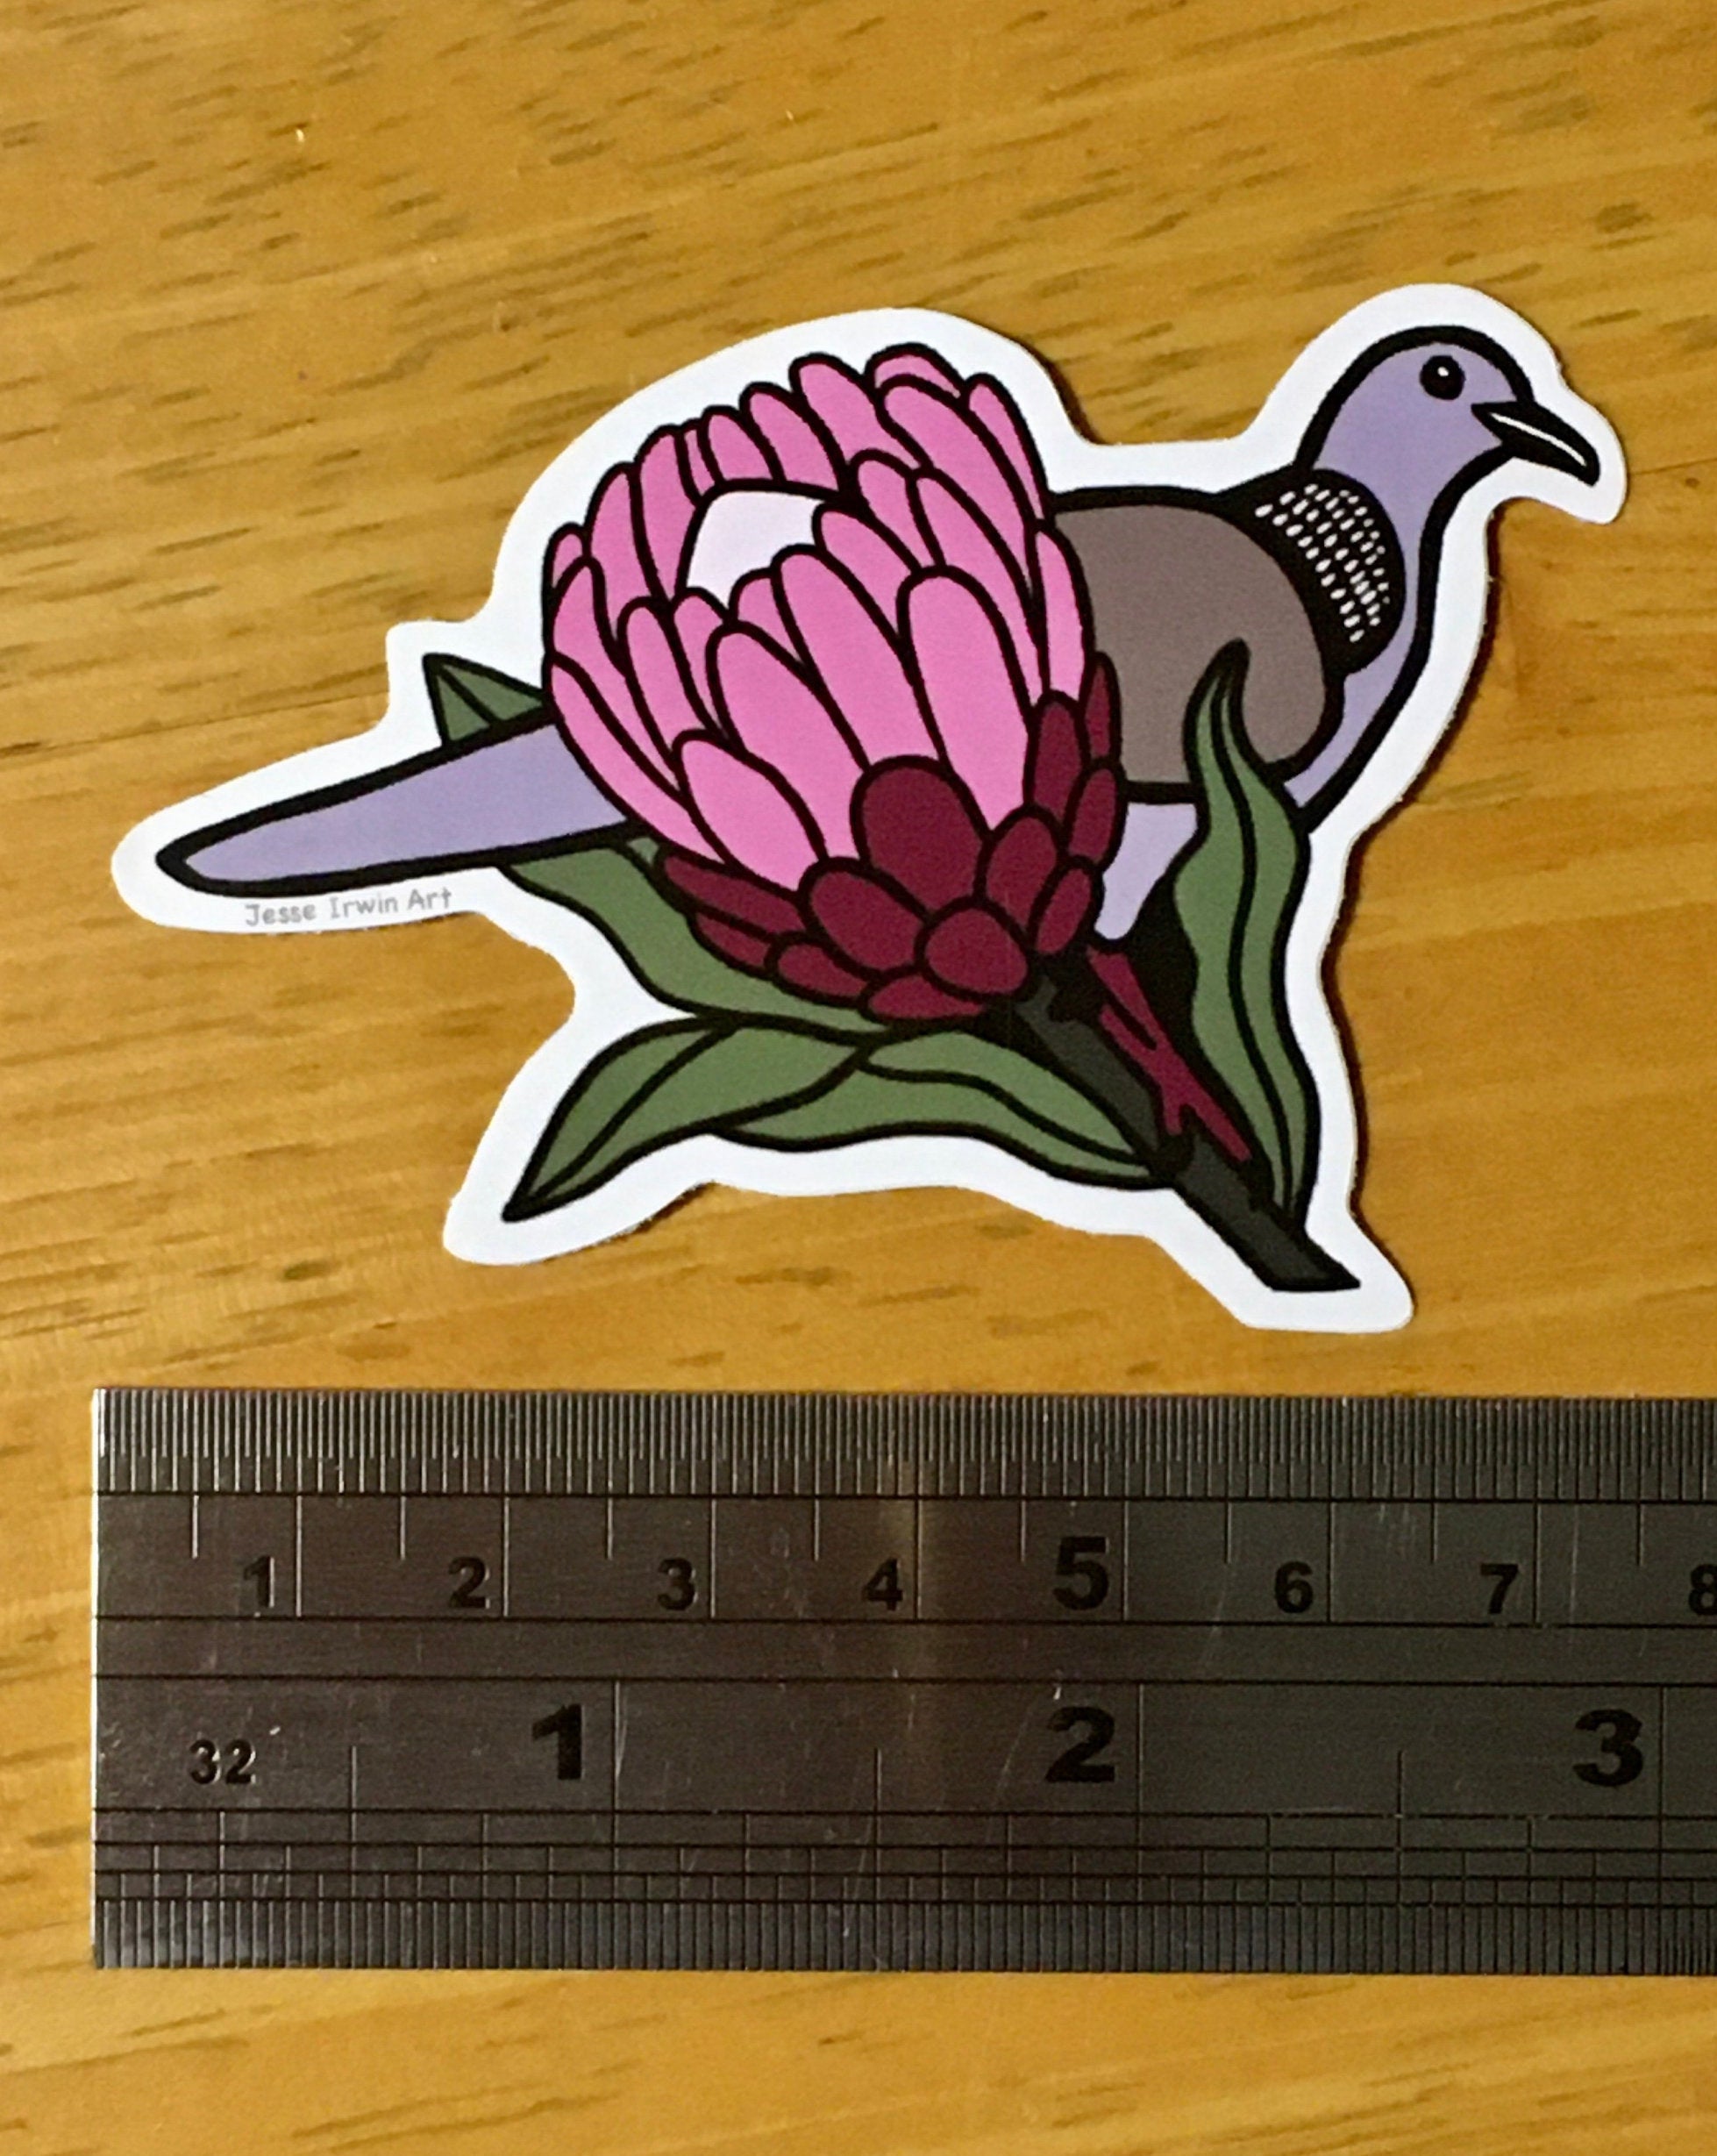 Spotted Dove and Protea Vinyl Sticker - Introduced Species - Australian Animals and Flowers - Die Cut Vinyl Sticker - Laptop Decal